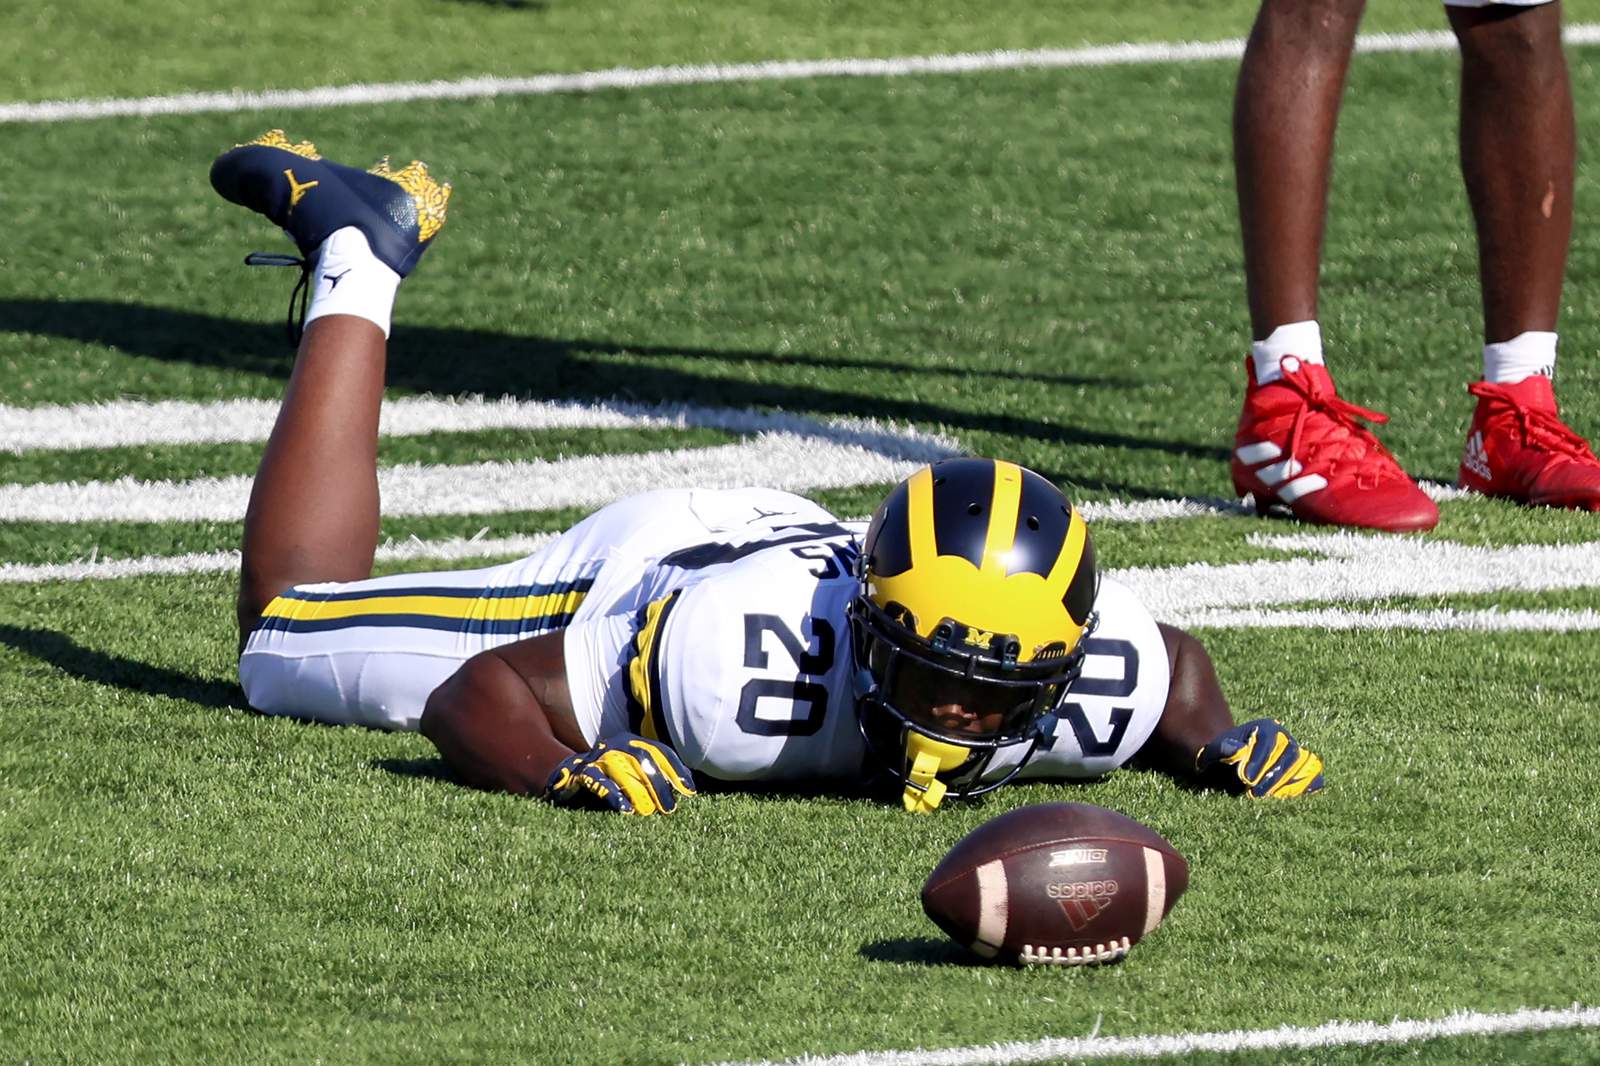 Michigan is perfect example of why college football needs a 16-team playoff (just hear me out)